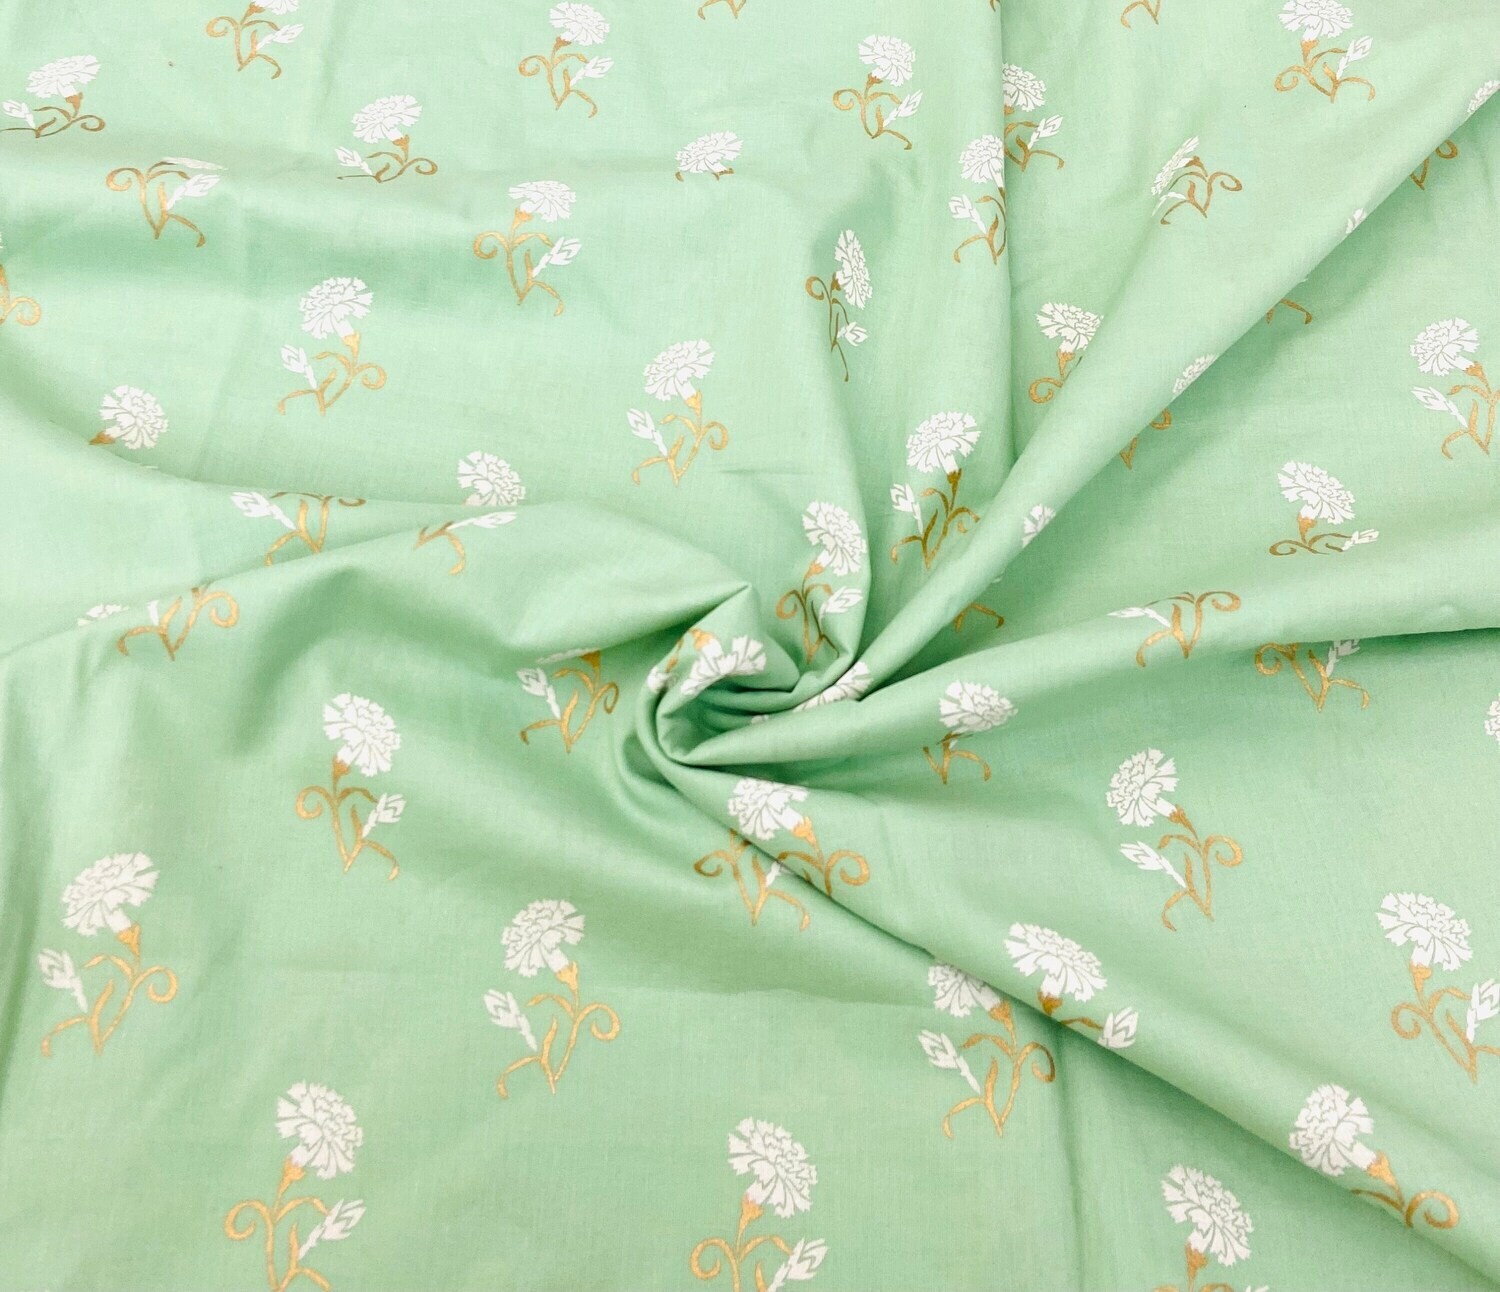 Pistachio Green Floral Indian Cotton Fabrics with Gold Print 44 Inches Wide